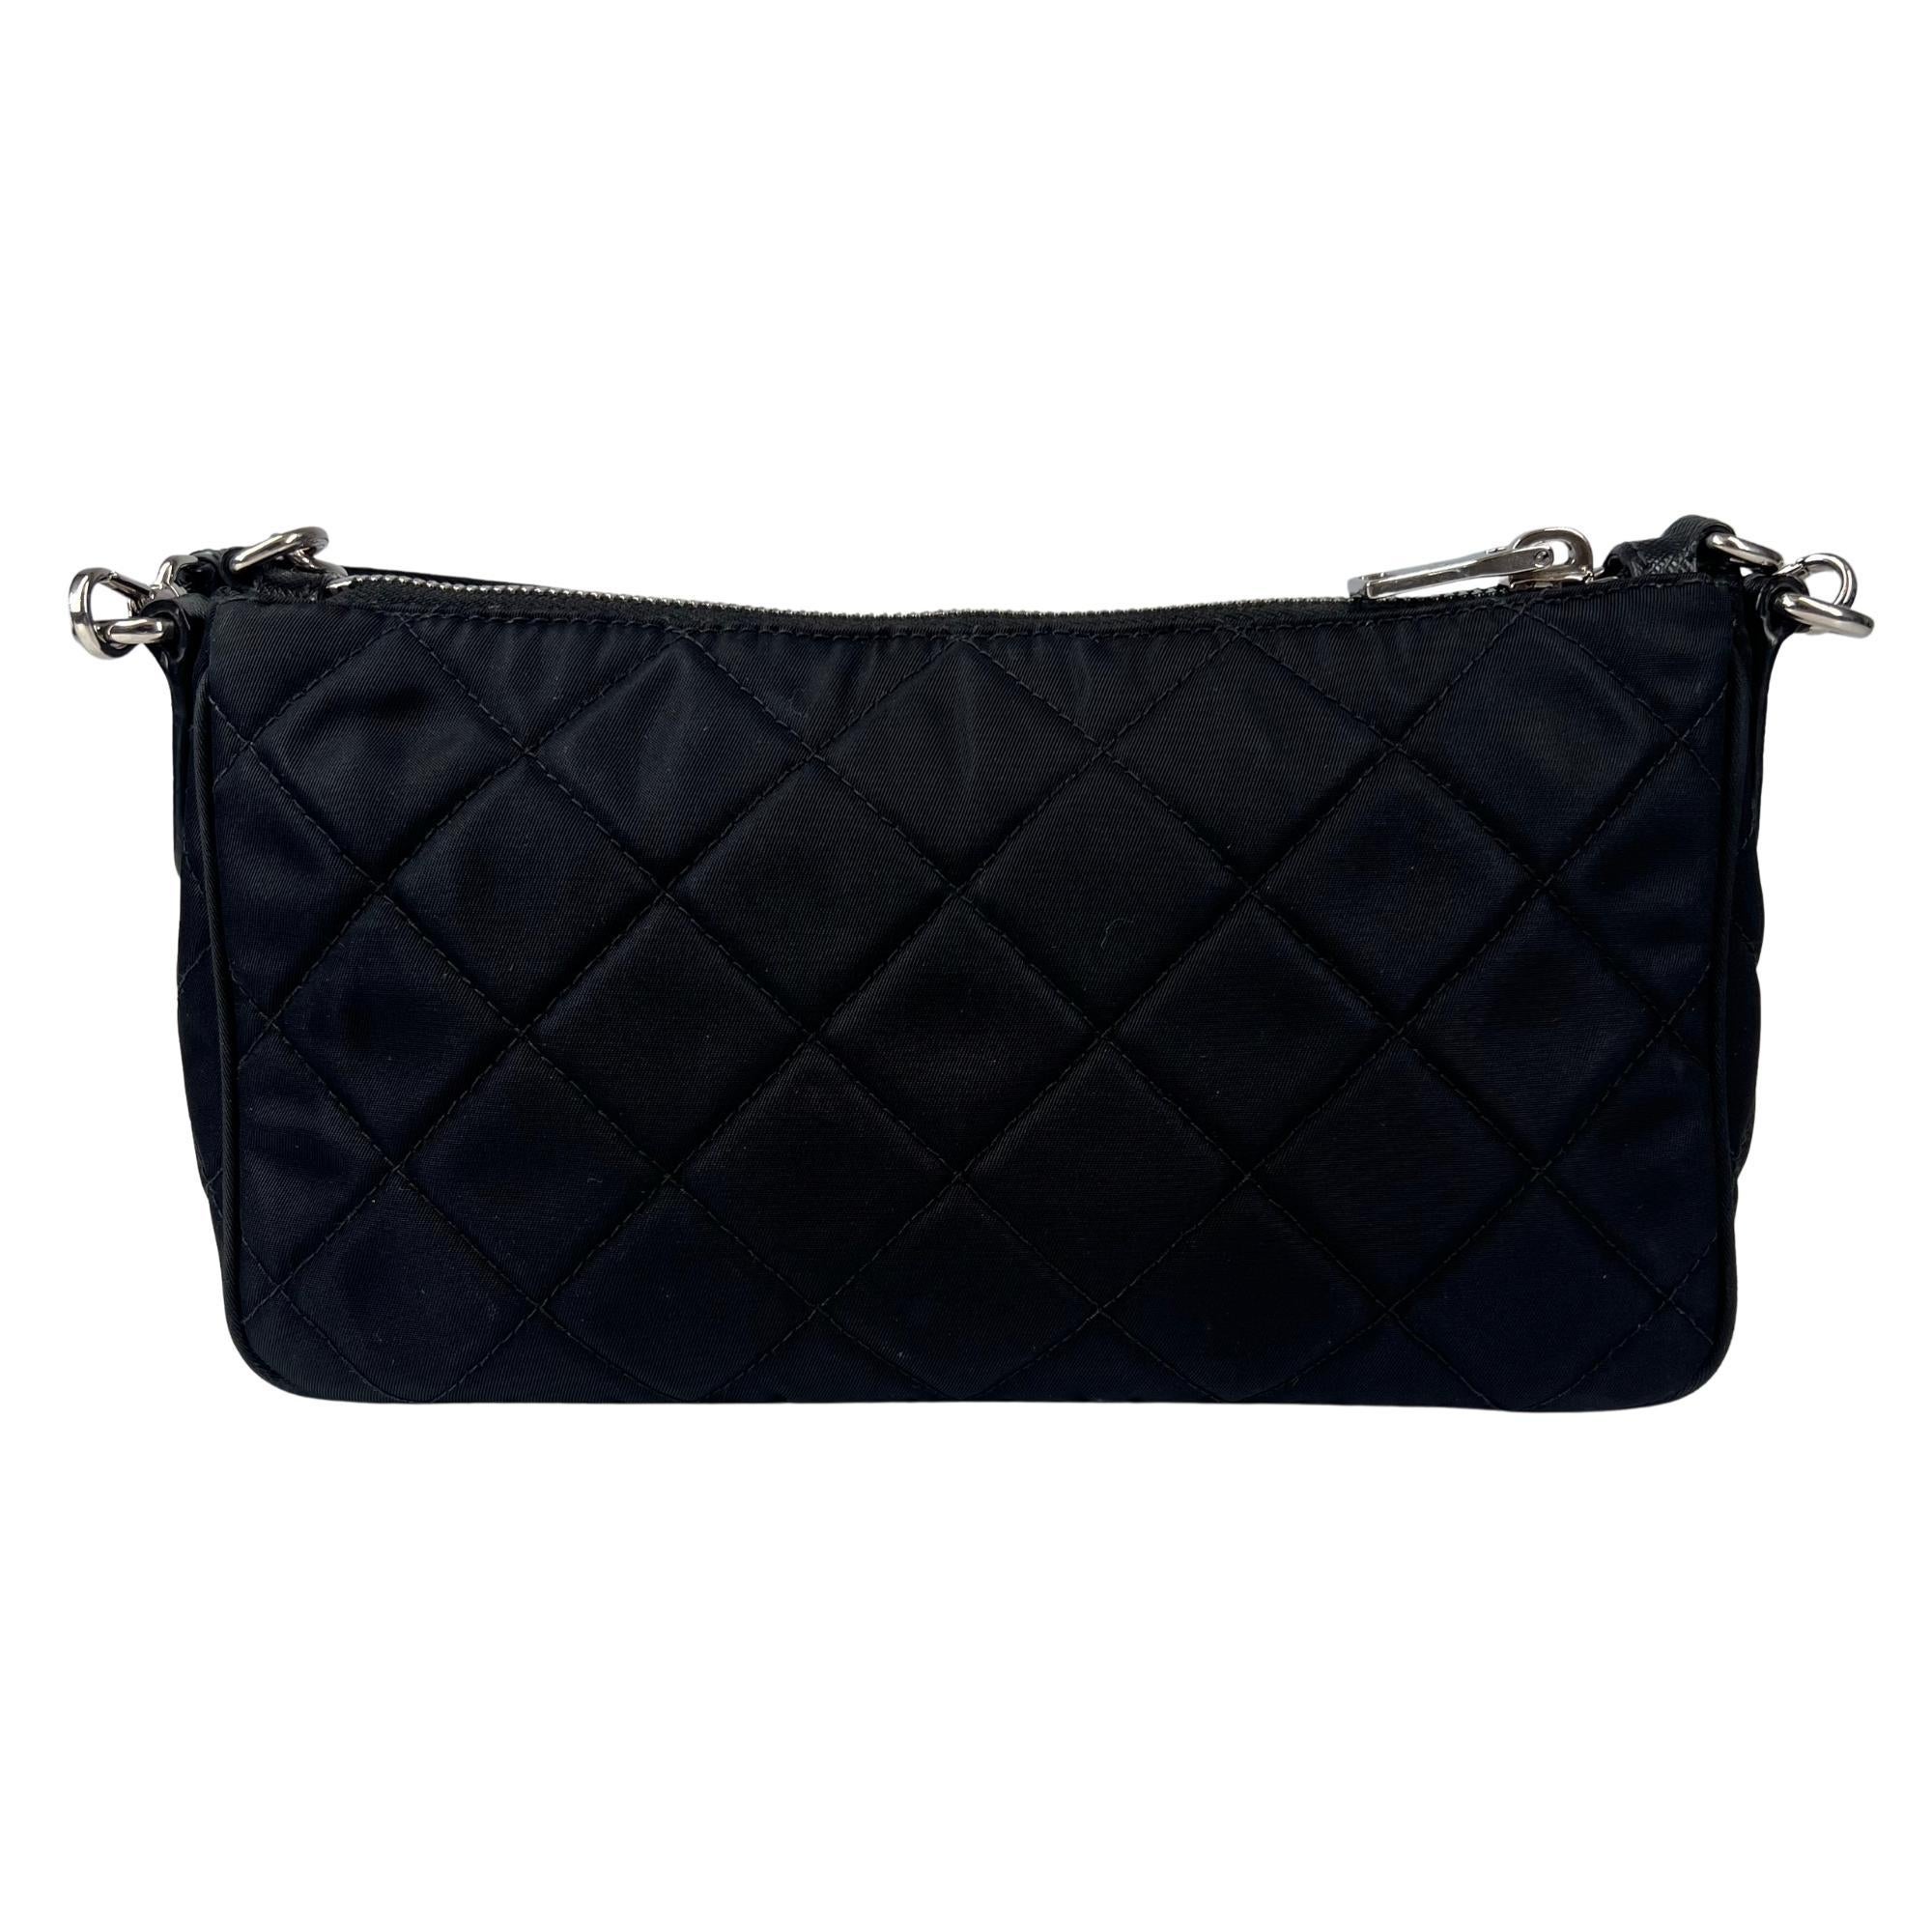 This shoulder bag is made with Prada's signature nylon in quilted black. The bag features top zipper closure, silver-tone hardware and black logo jacquard interior lining. The bag is complete with a chain shoulder strap and an optional leather